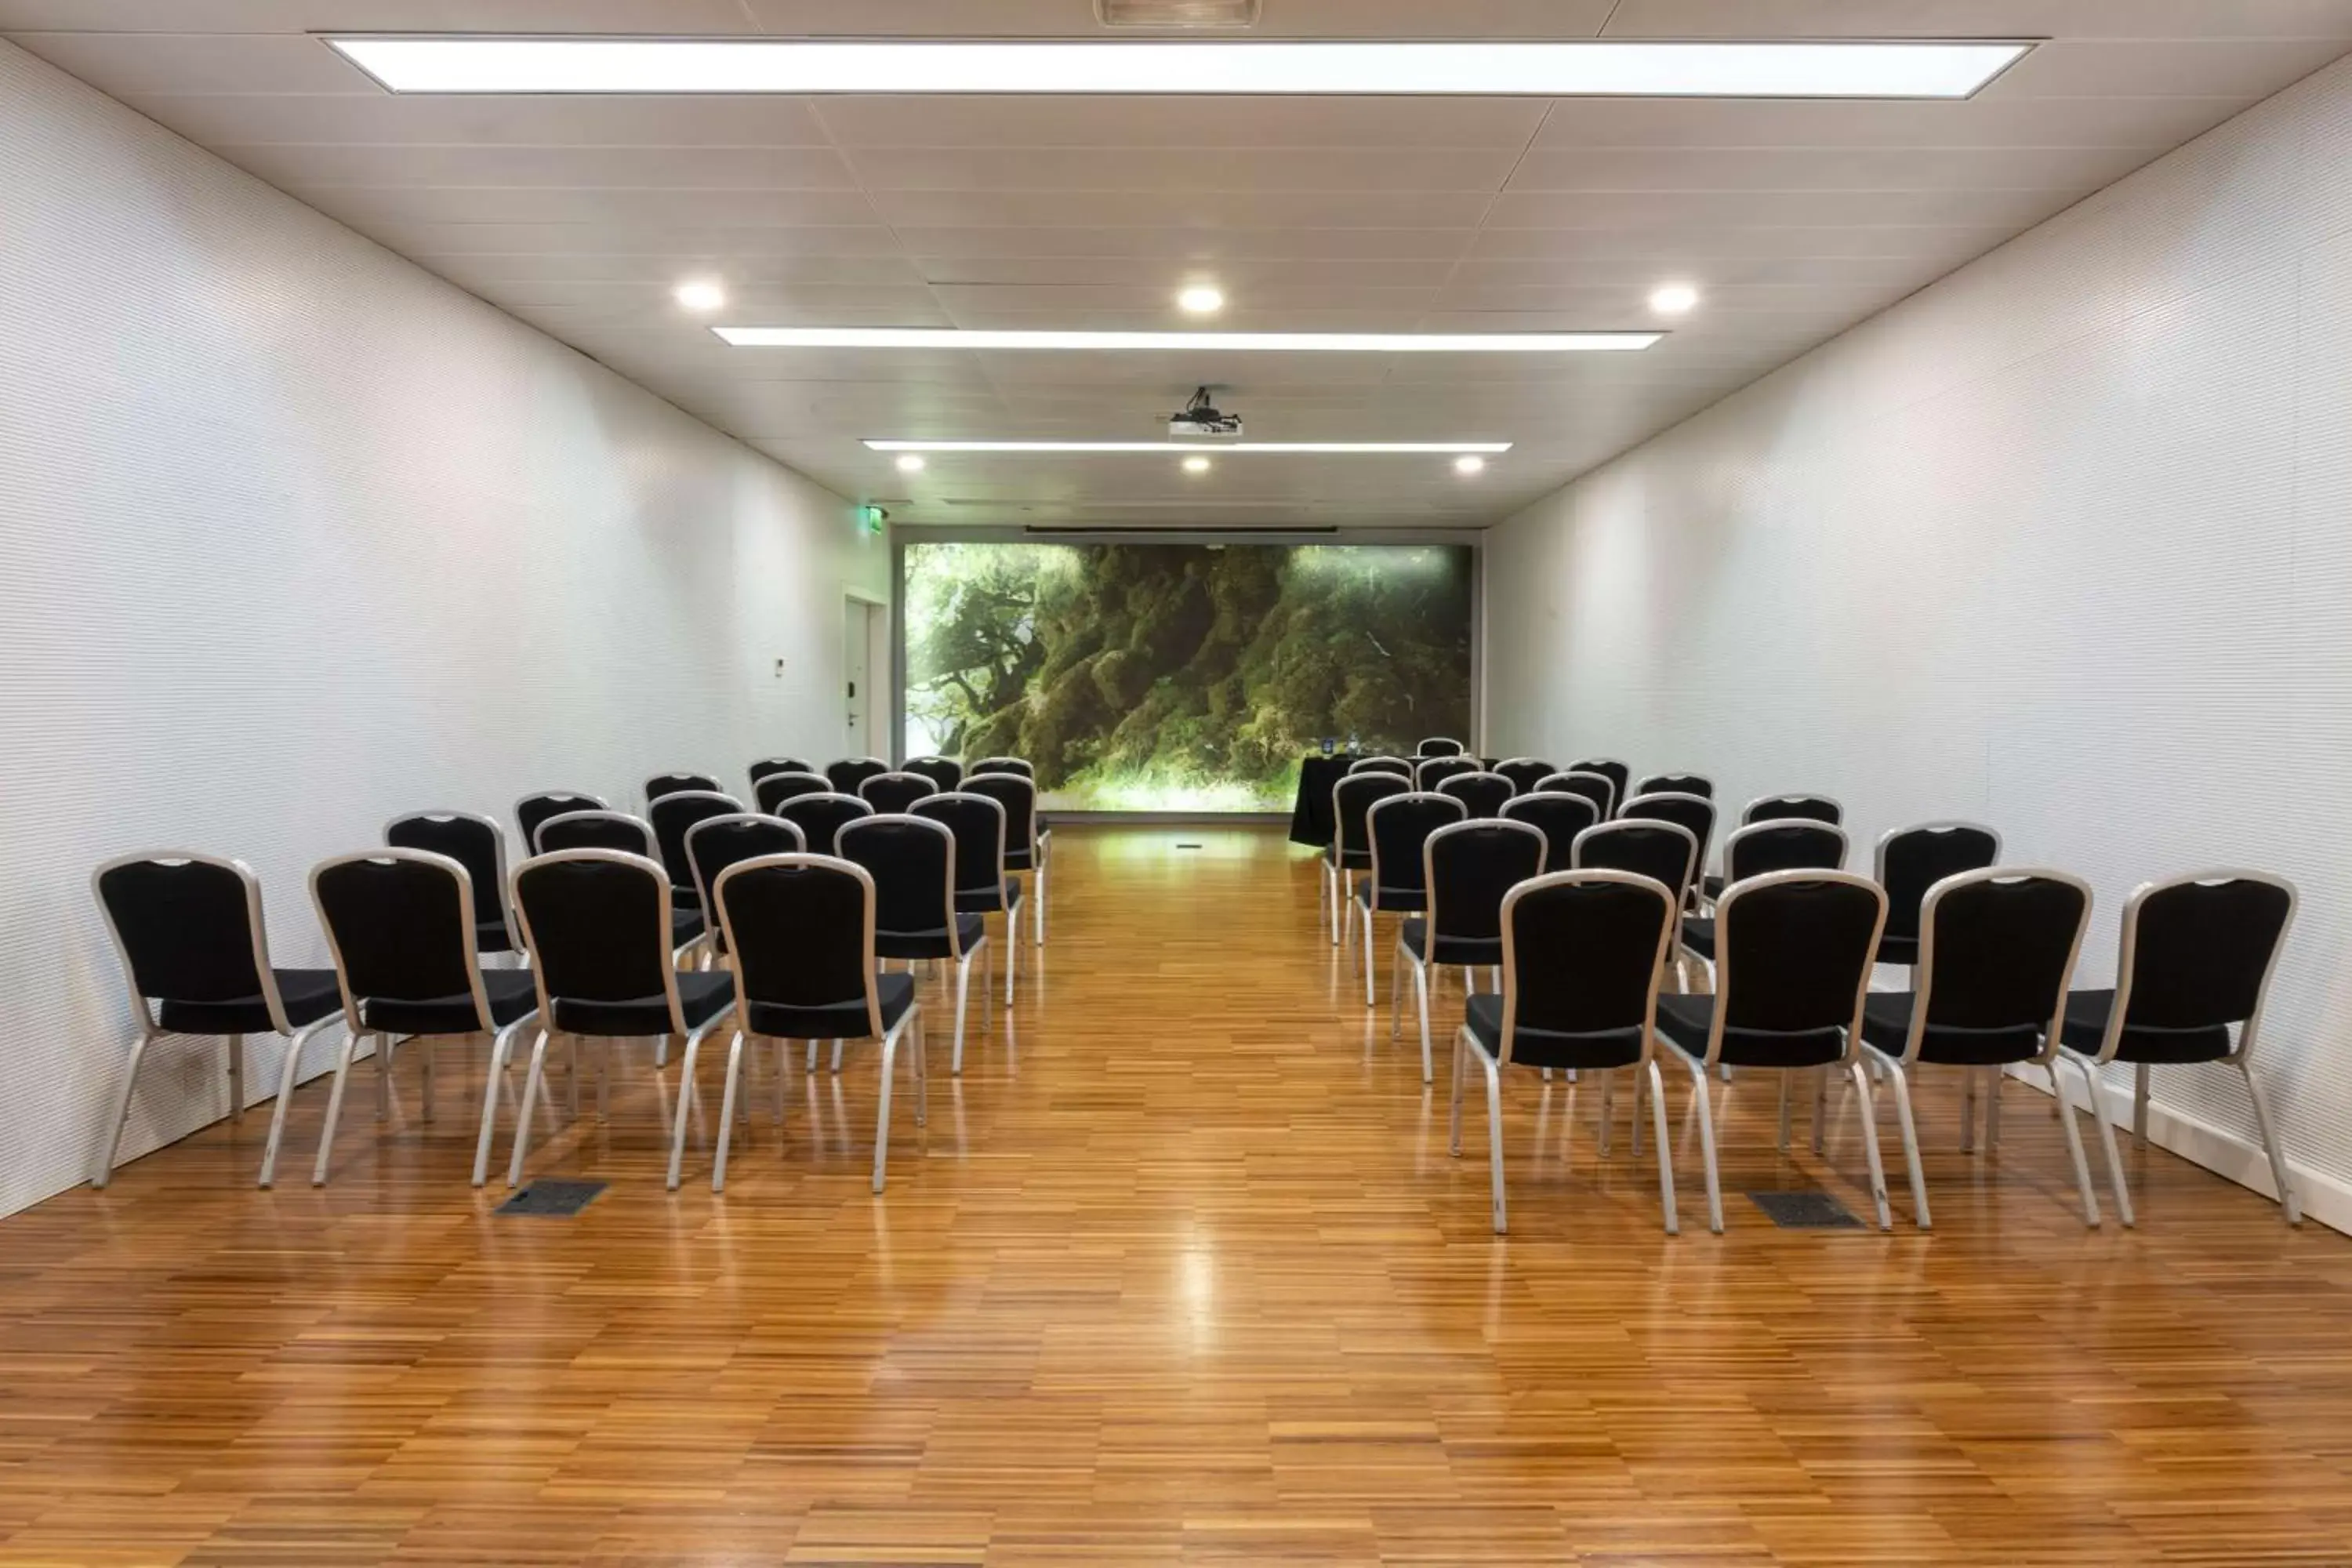 Meeting/conference room in DoubleTree by Hilton Lisbon Fontana Park